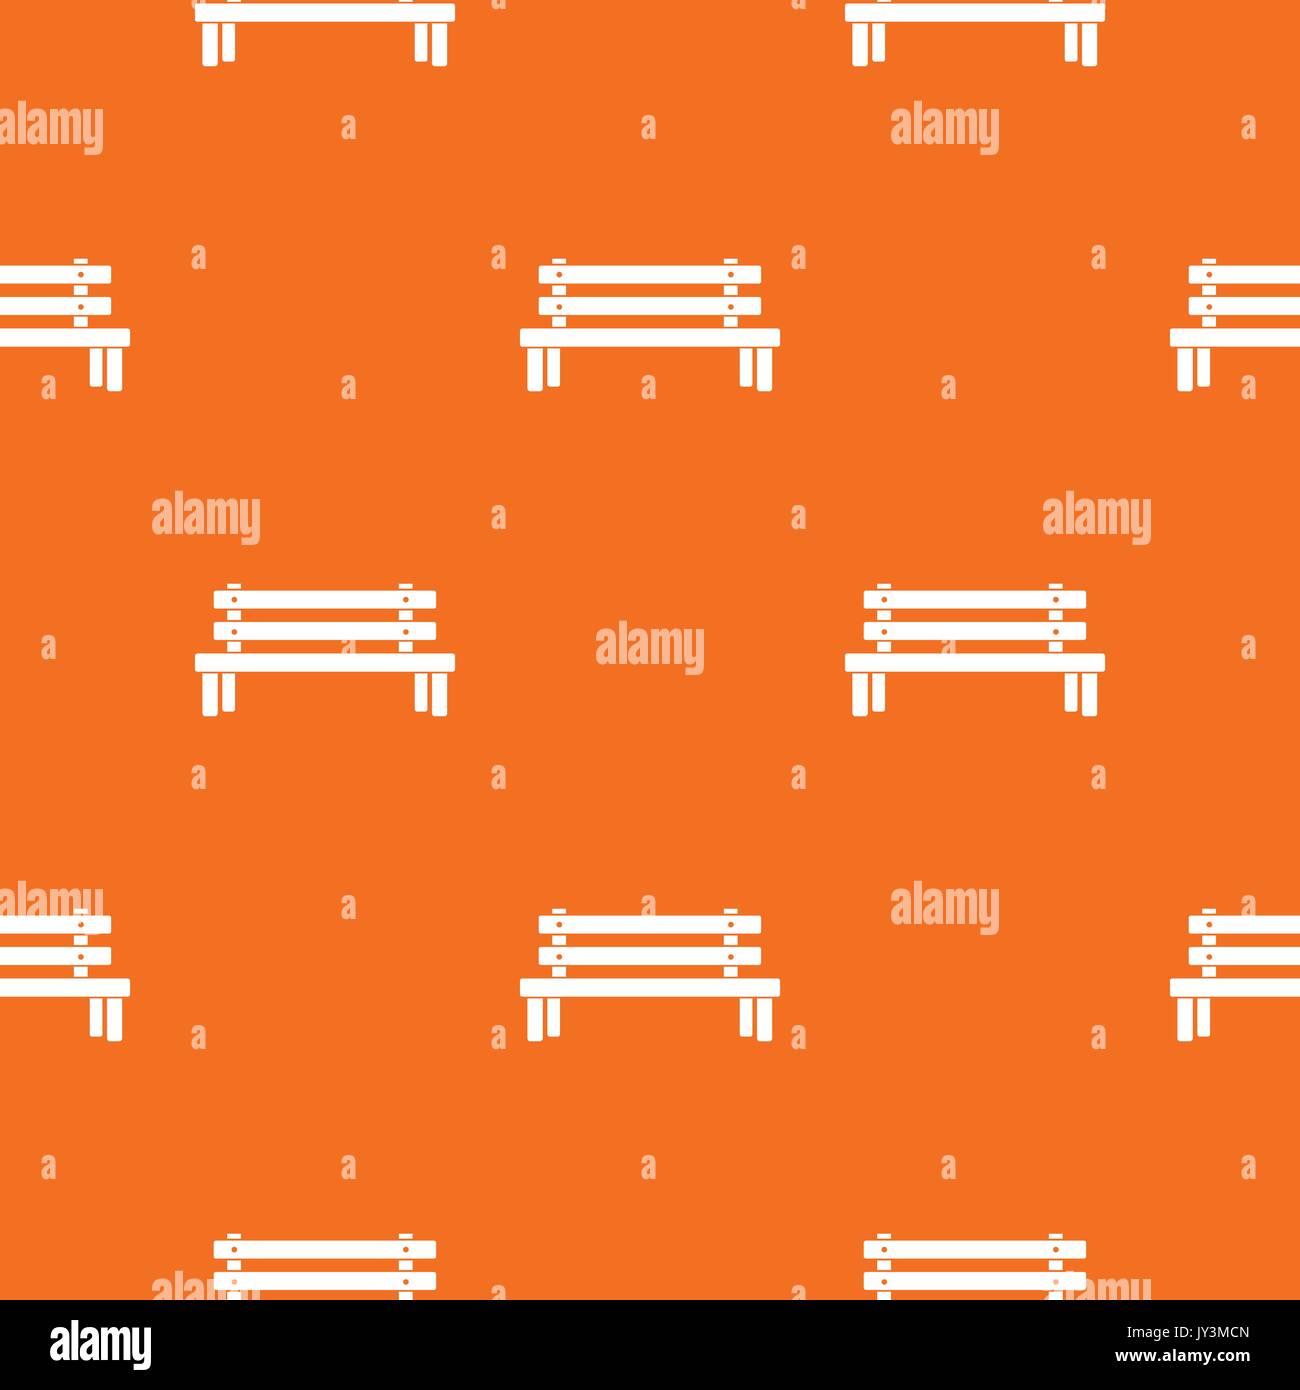 Wooden bench pattern seamless Stock Vector